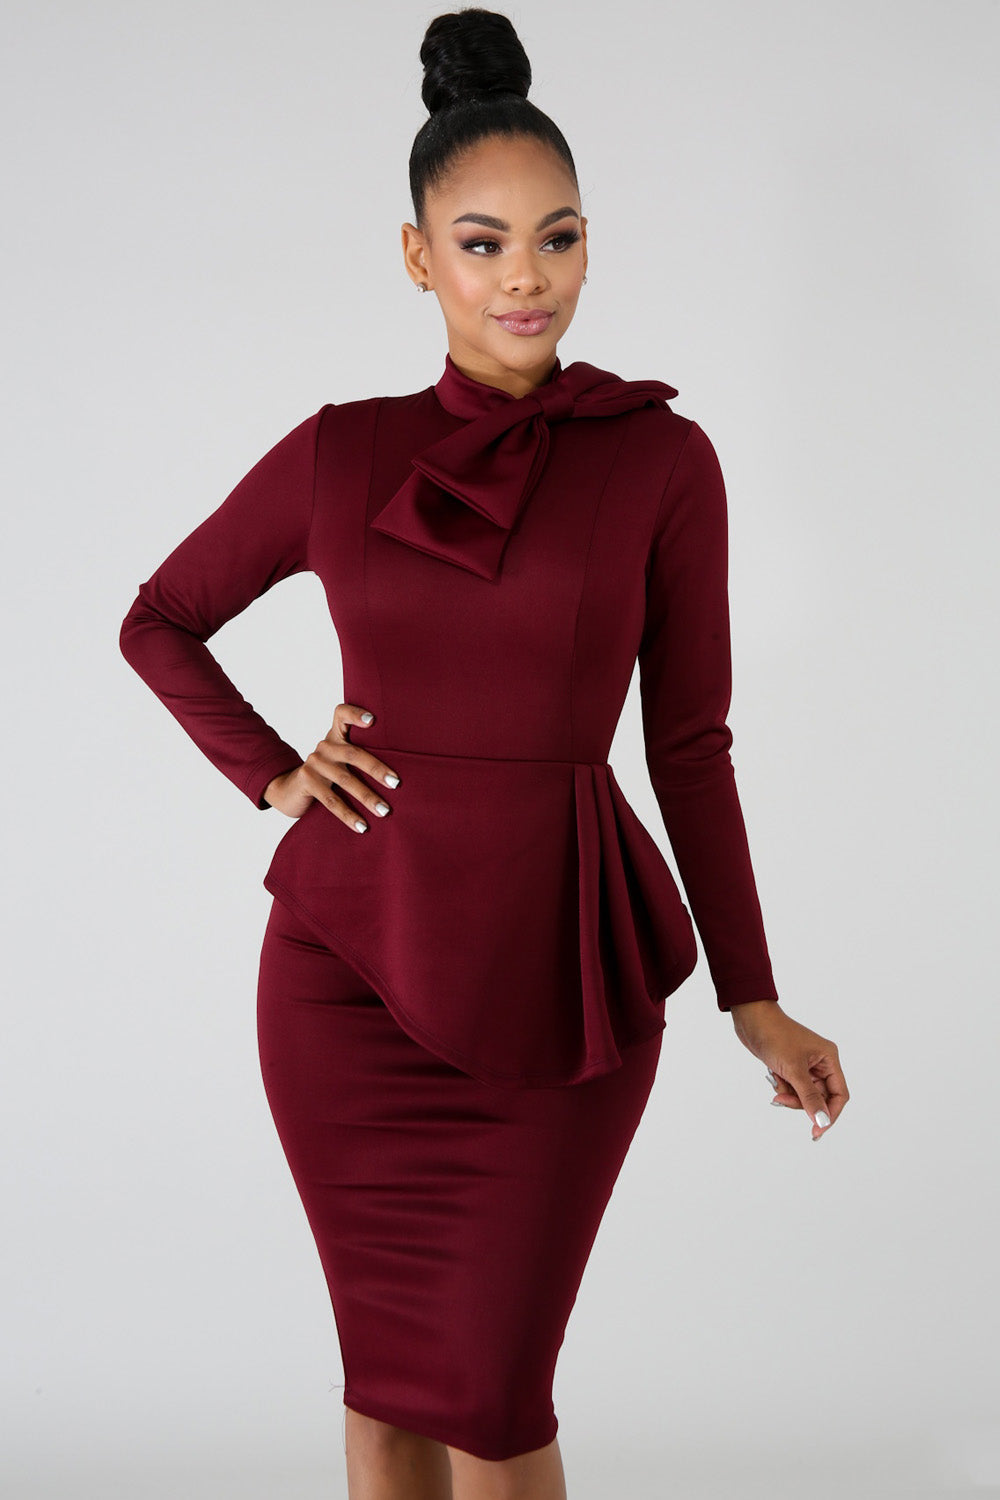 goPals fitted long sleeve burgundy dress with neck tie and peplum waist. 